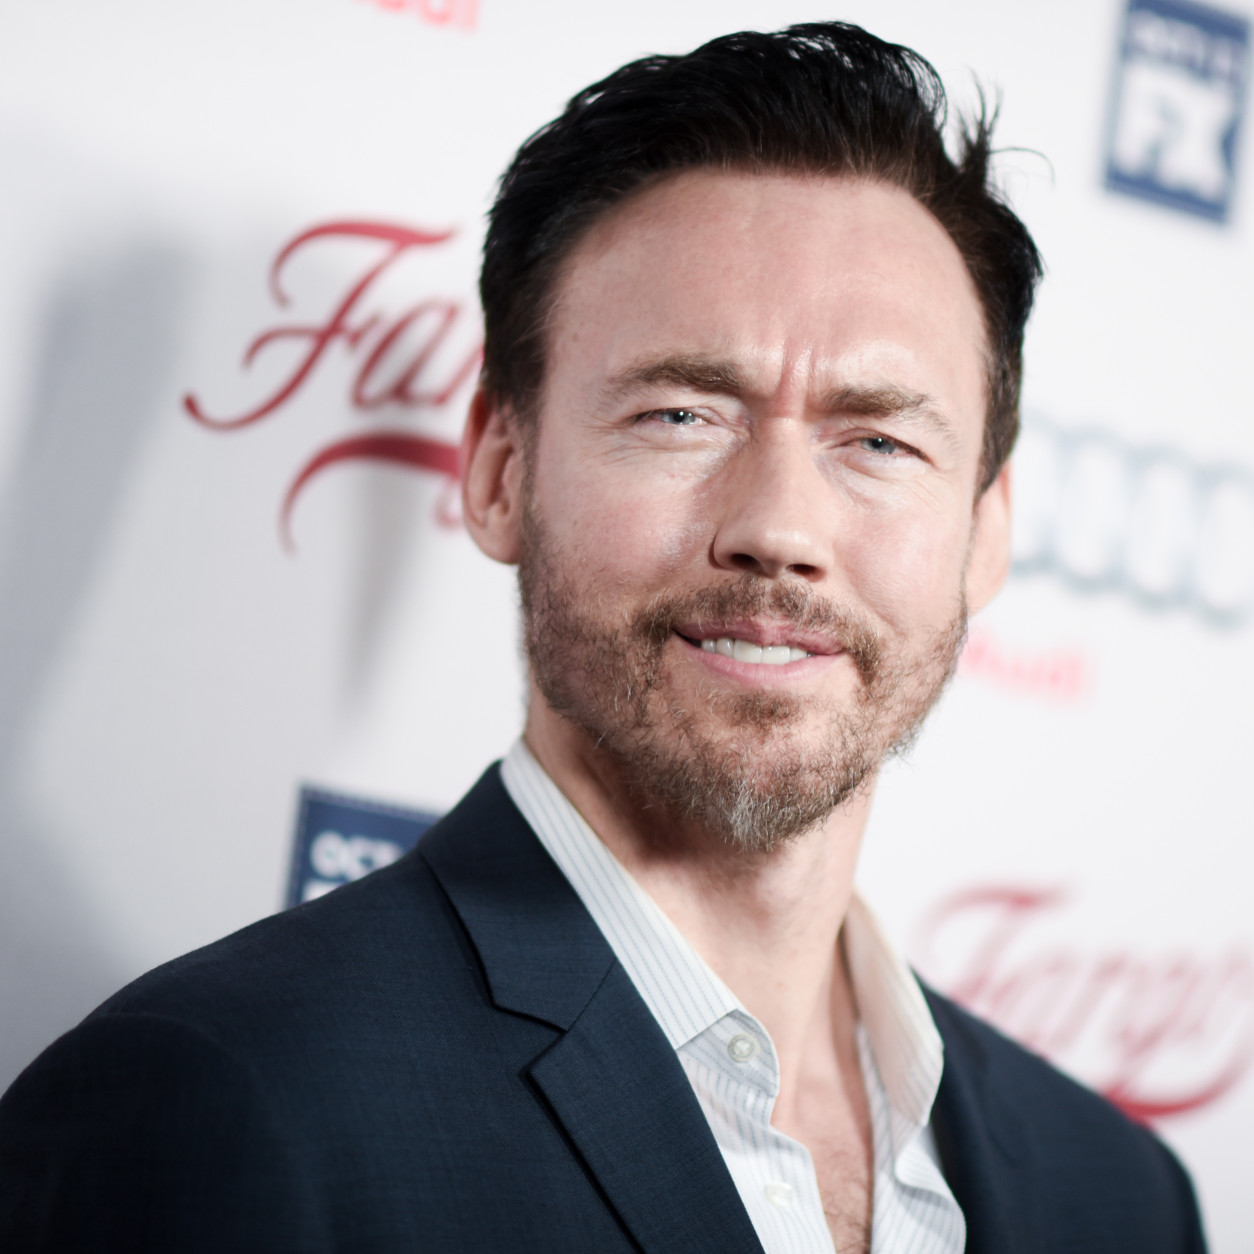 Kevin Durand attends the after-party for the LA Premiere of "Fargo" Season two on Wednesday, Oct. 7, 2015, in Los Angeles. (Photo by Richard Shotwell/Invision/AP)